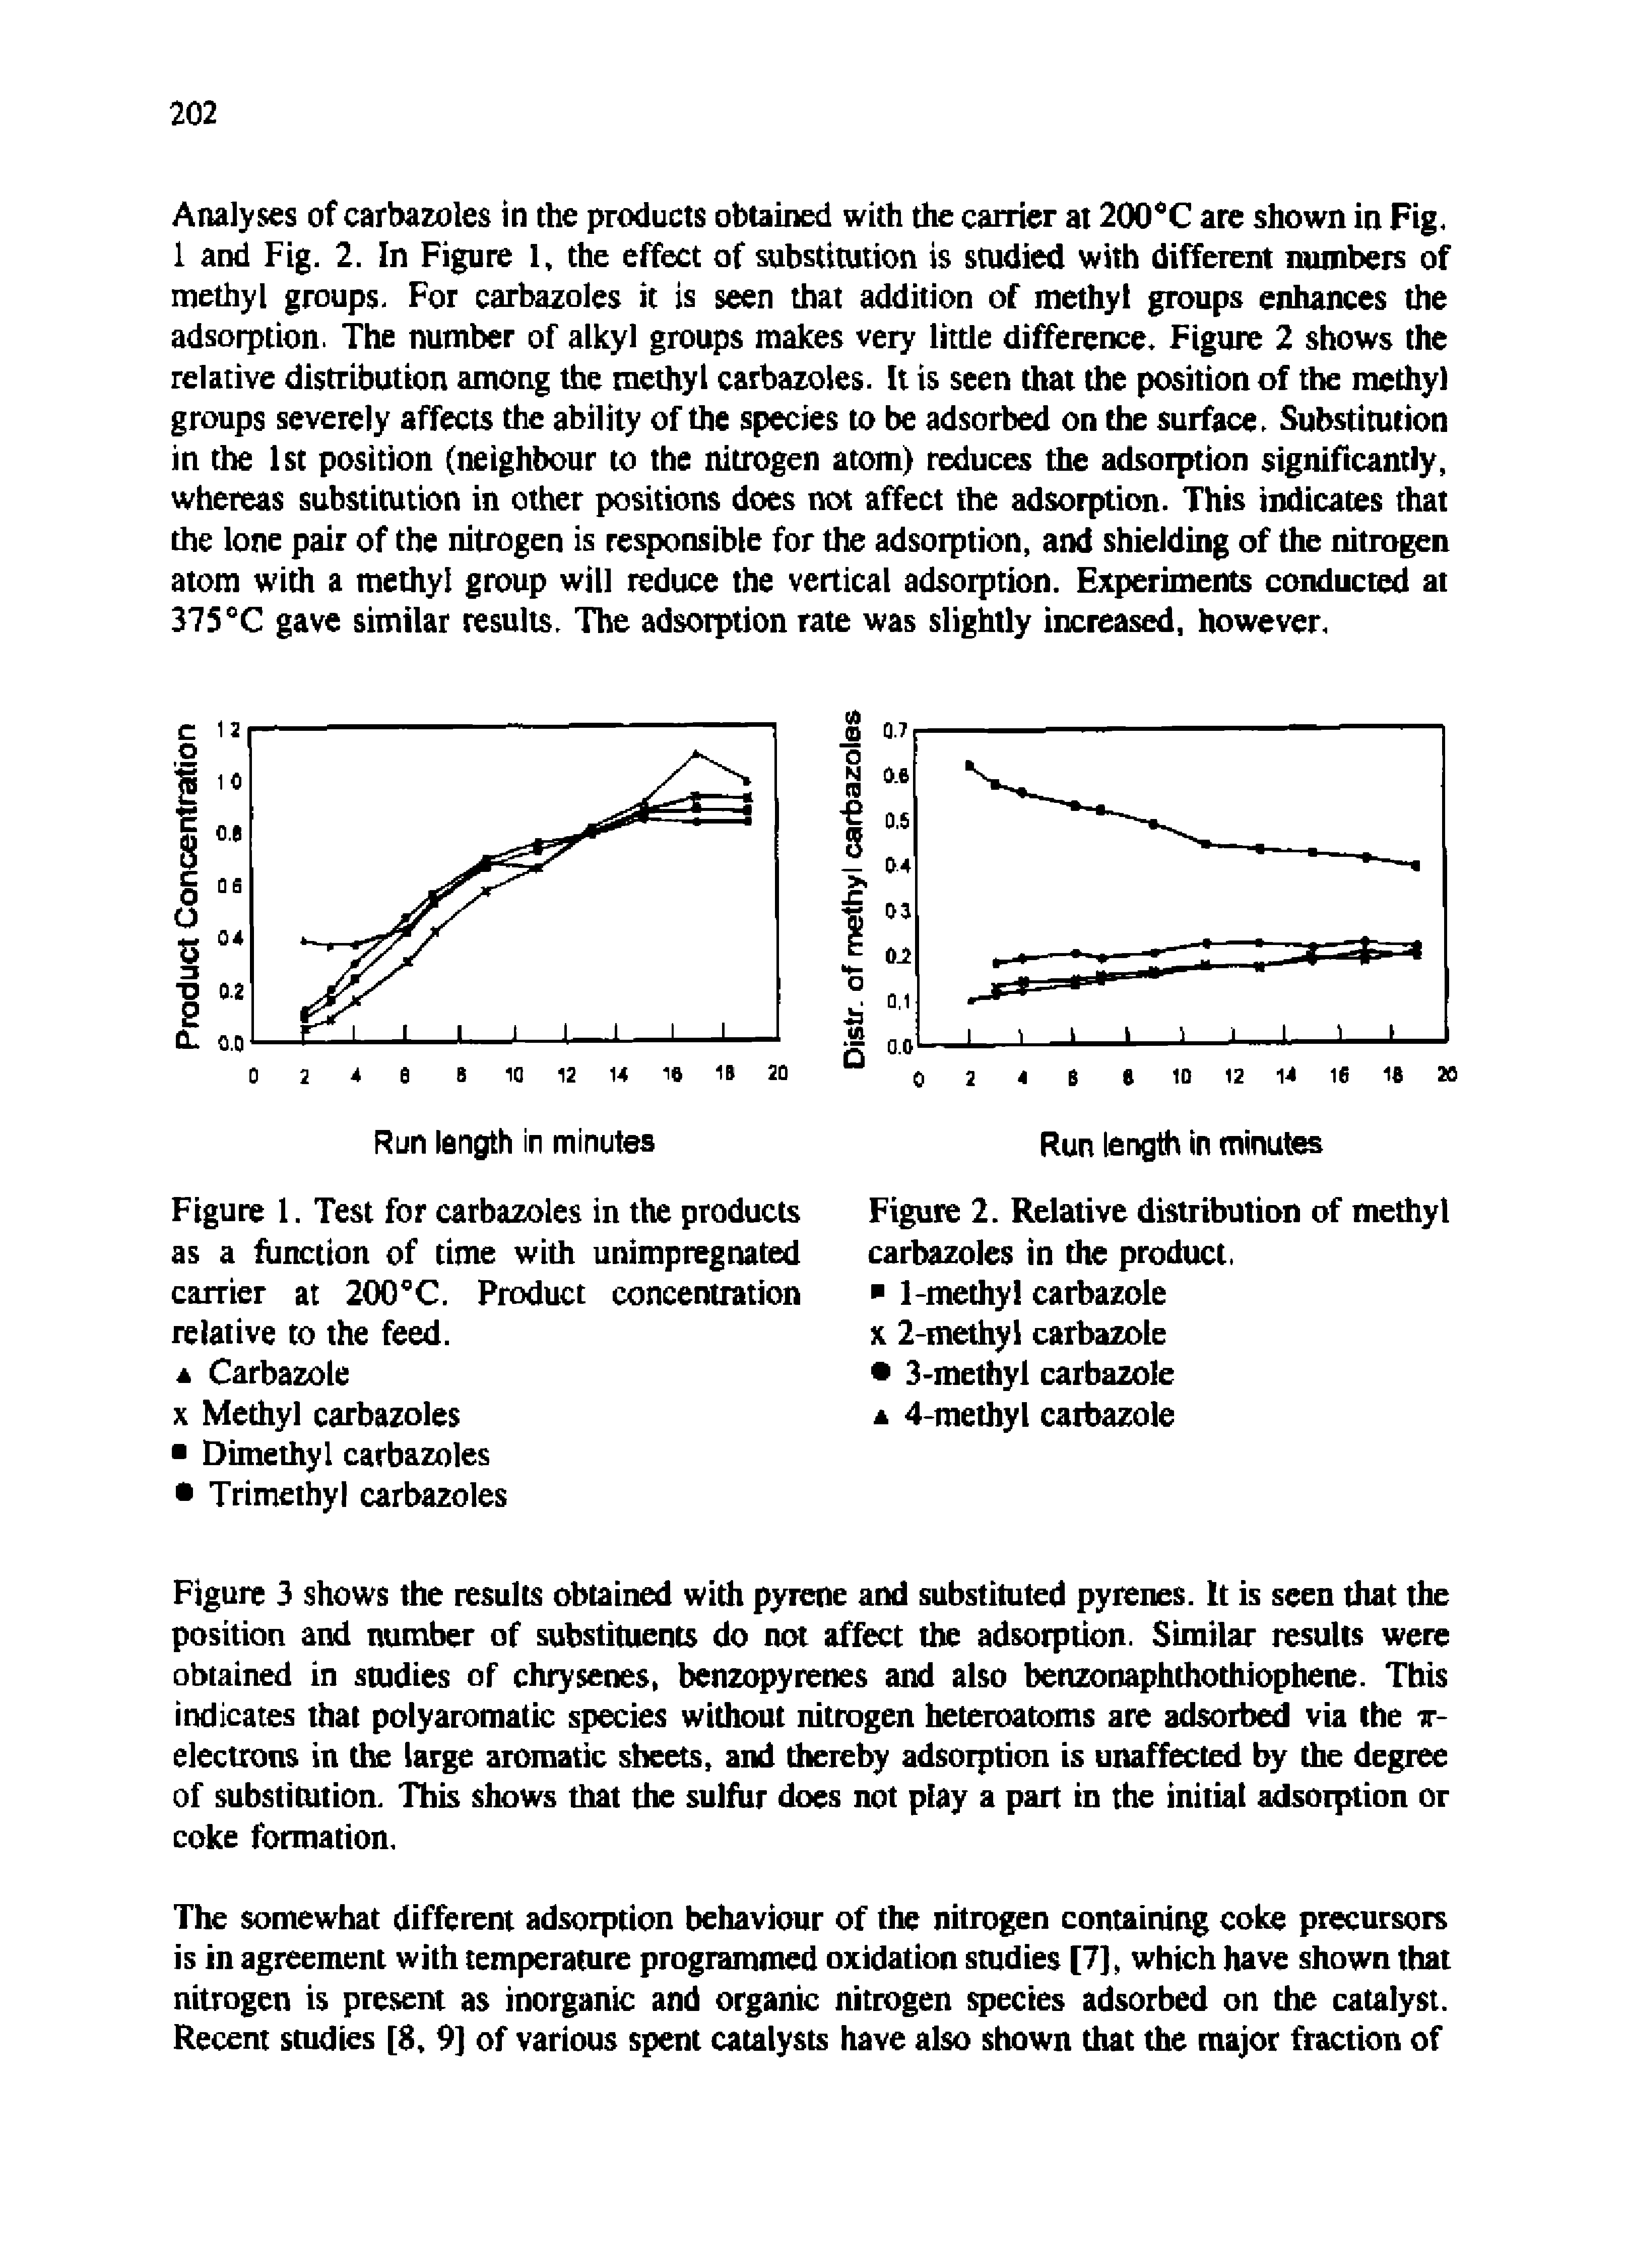 Figure 1. Test for carbazoles in the products as a function of time with unimpregnated carrier at 200flC. Product concentration relative to the feed. a Carbazole x Methyl carbazoles Dimethyl carbazoles Trimethyl carbazoles...